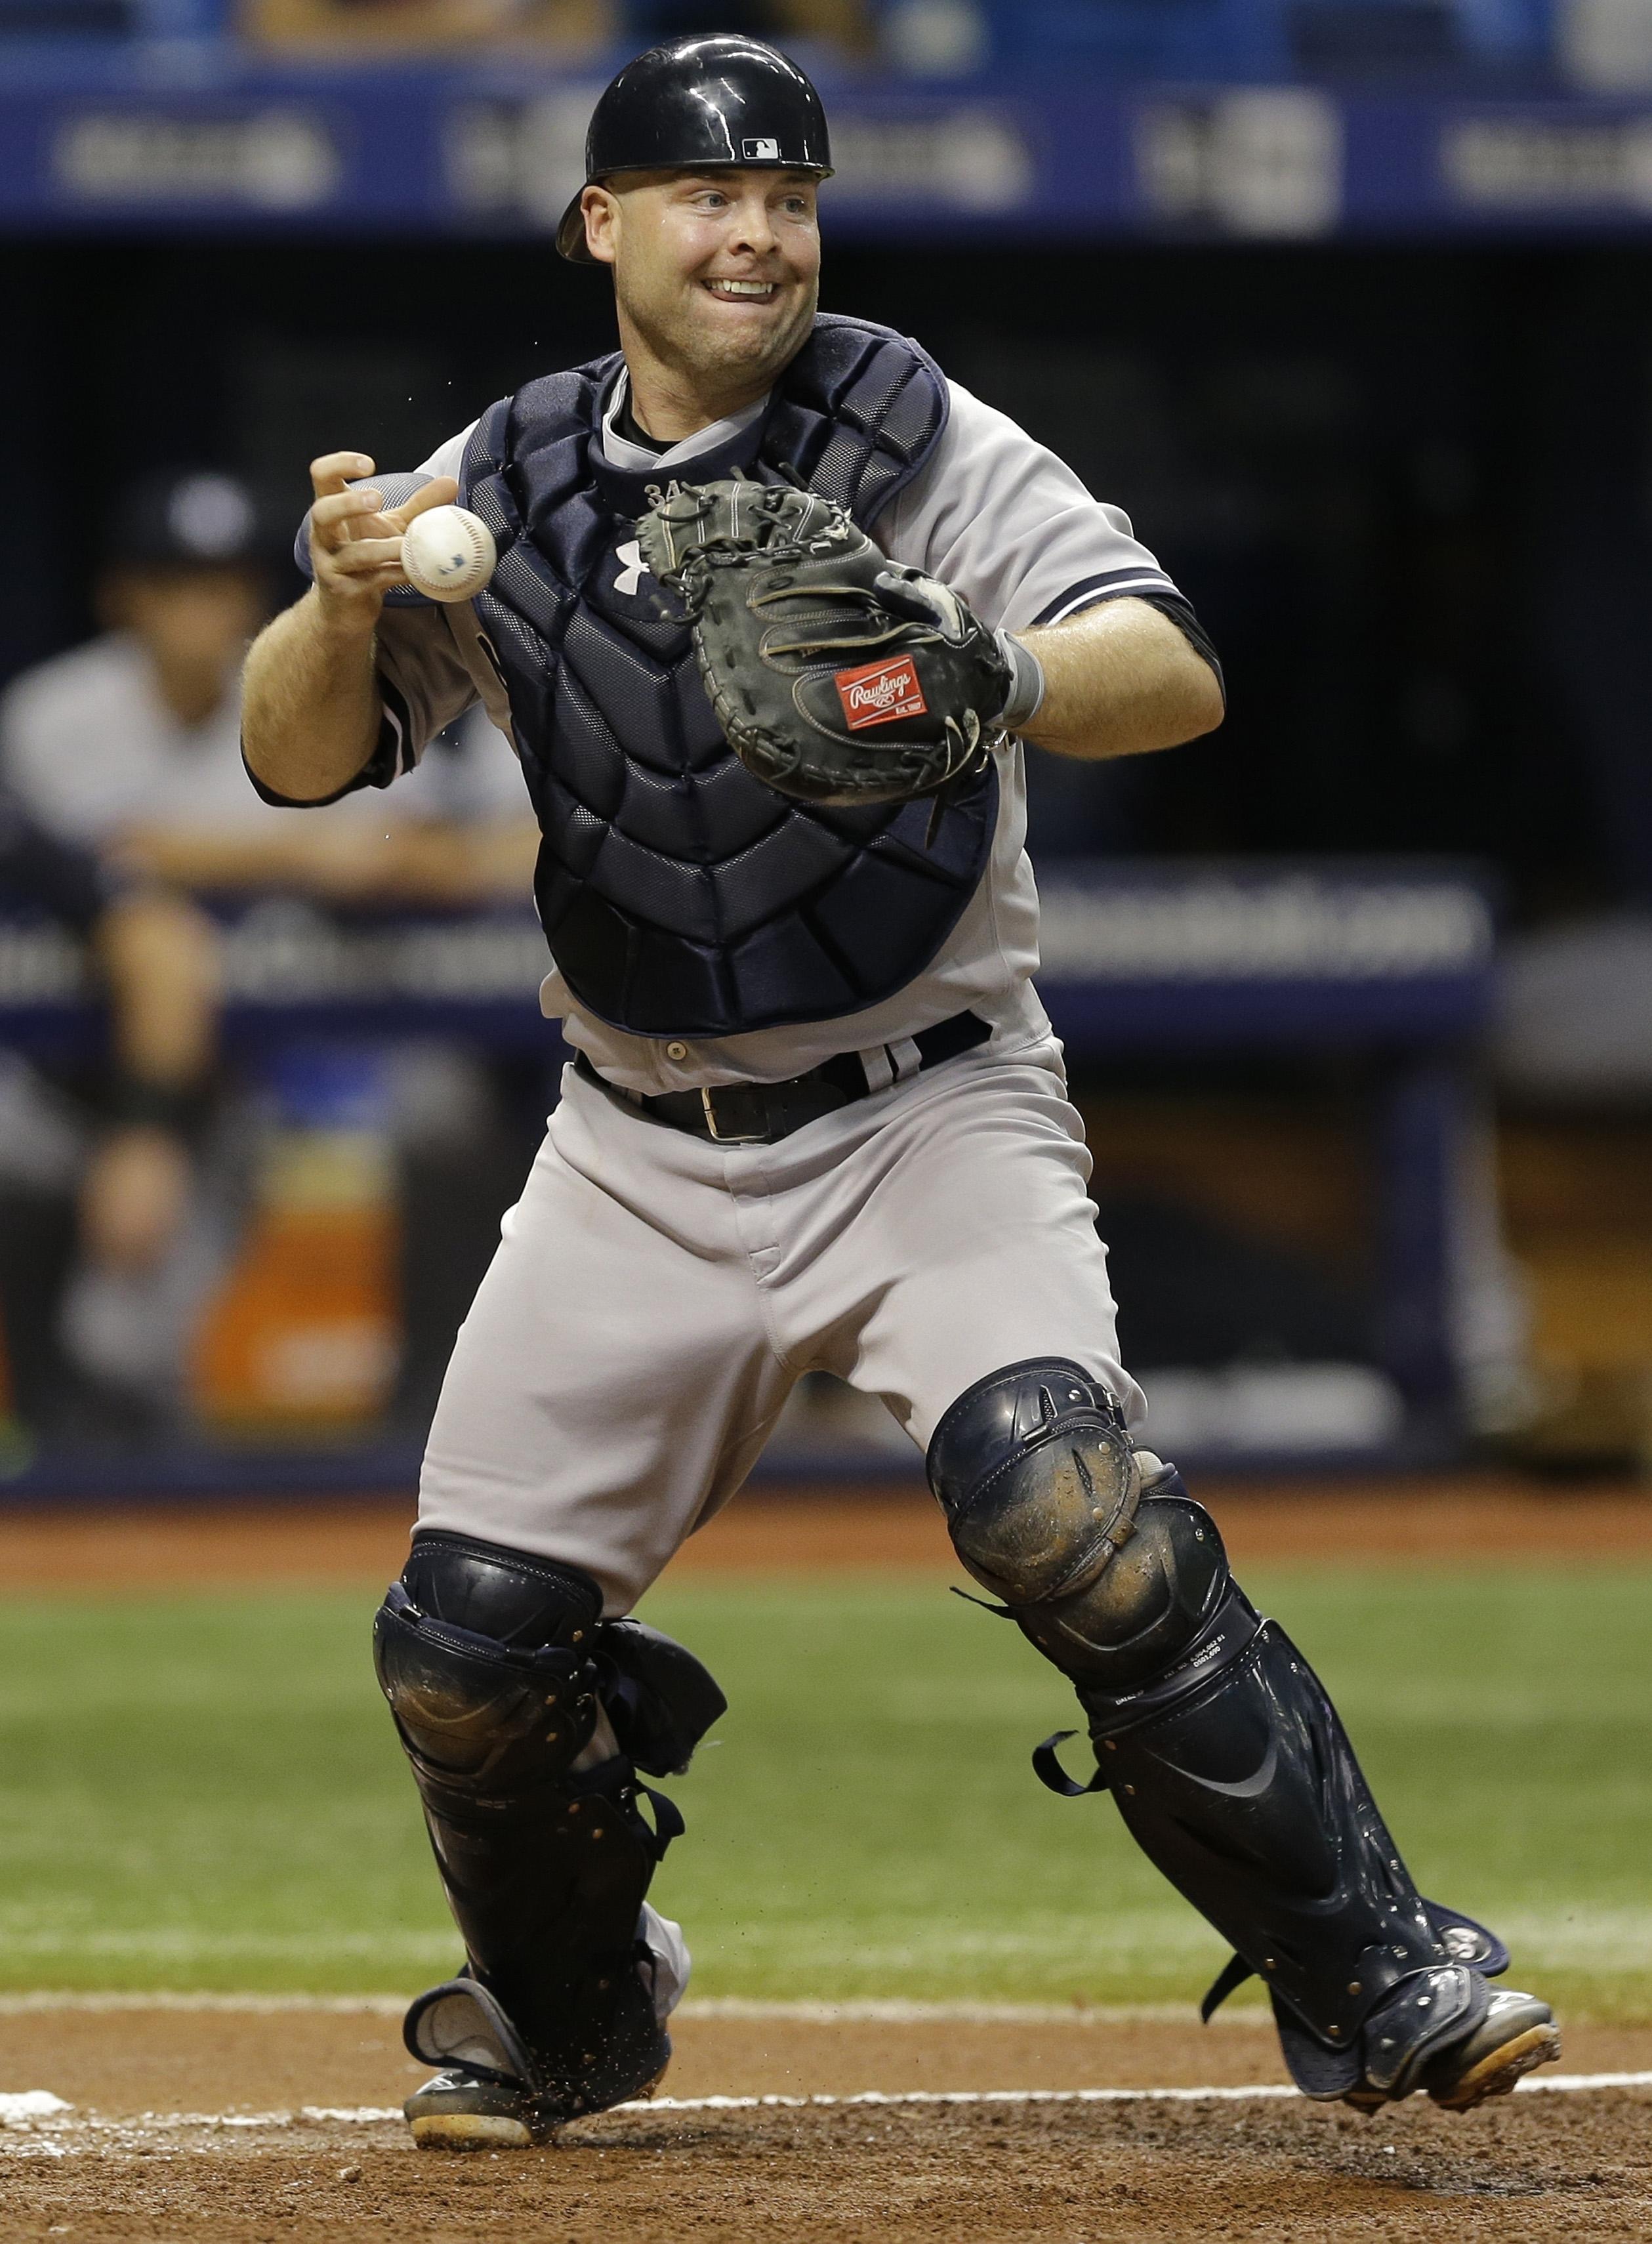 Yankees trade Brian McCann, $11M to Astros for 2 young pitchers